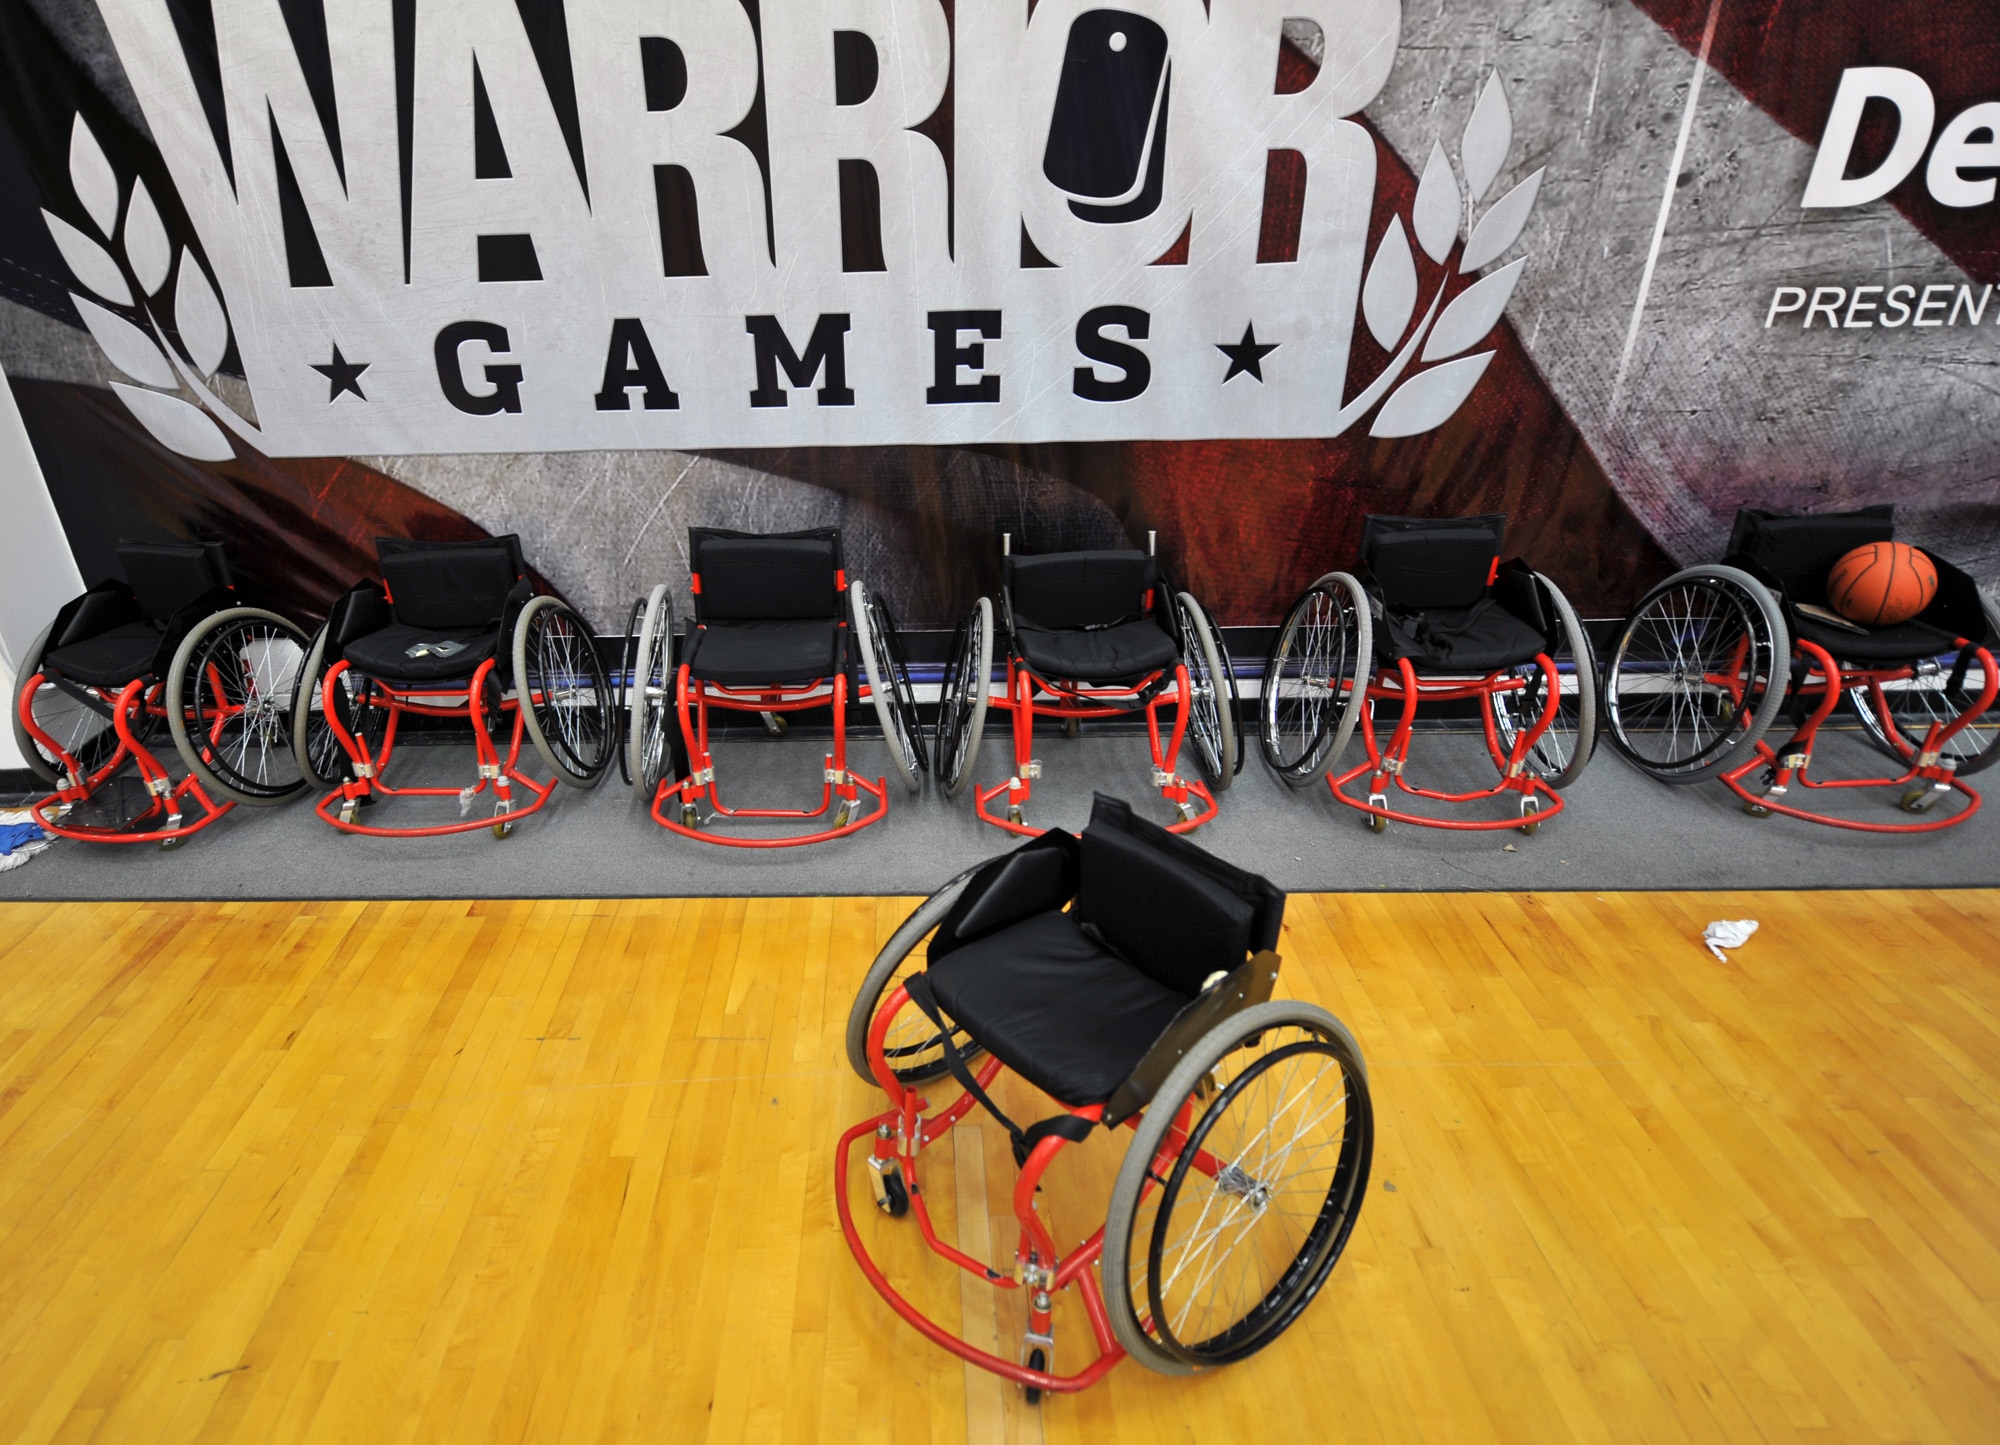 Wheelchairs are lined up against a wall in the basketball court May 10, 2010, at the Olympic Training Center in Colorado Springs, Colo.  Teams from the Air Force, Army, Navy, Marines and Coast Guard are participating in the inaugural Warrior Games which begin May 10 and finish May 14.  One of the competition events is wheelchair basketball.  (U.S. Air Force photo/Staff Sgt. Desiree N. Palacios)